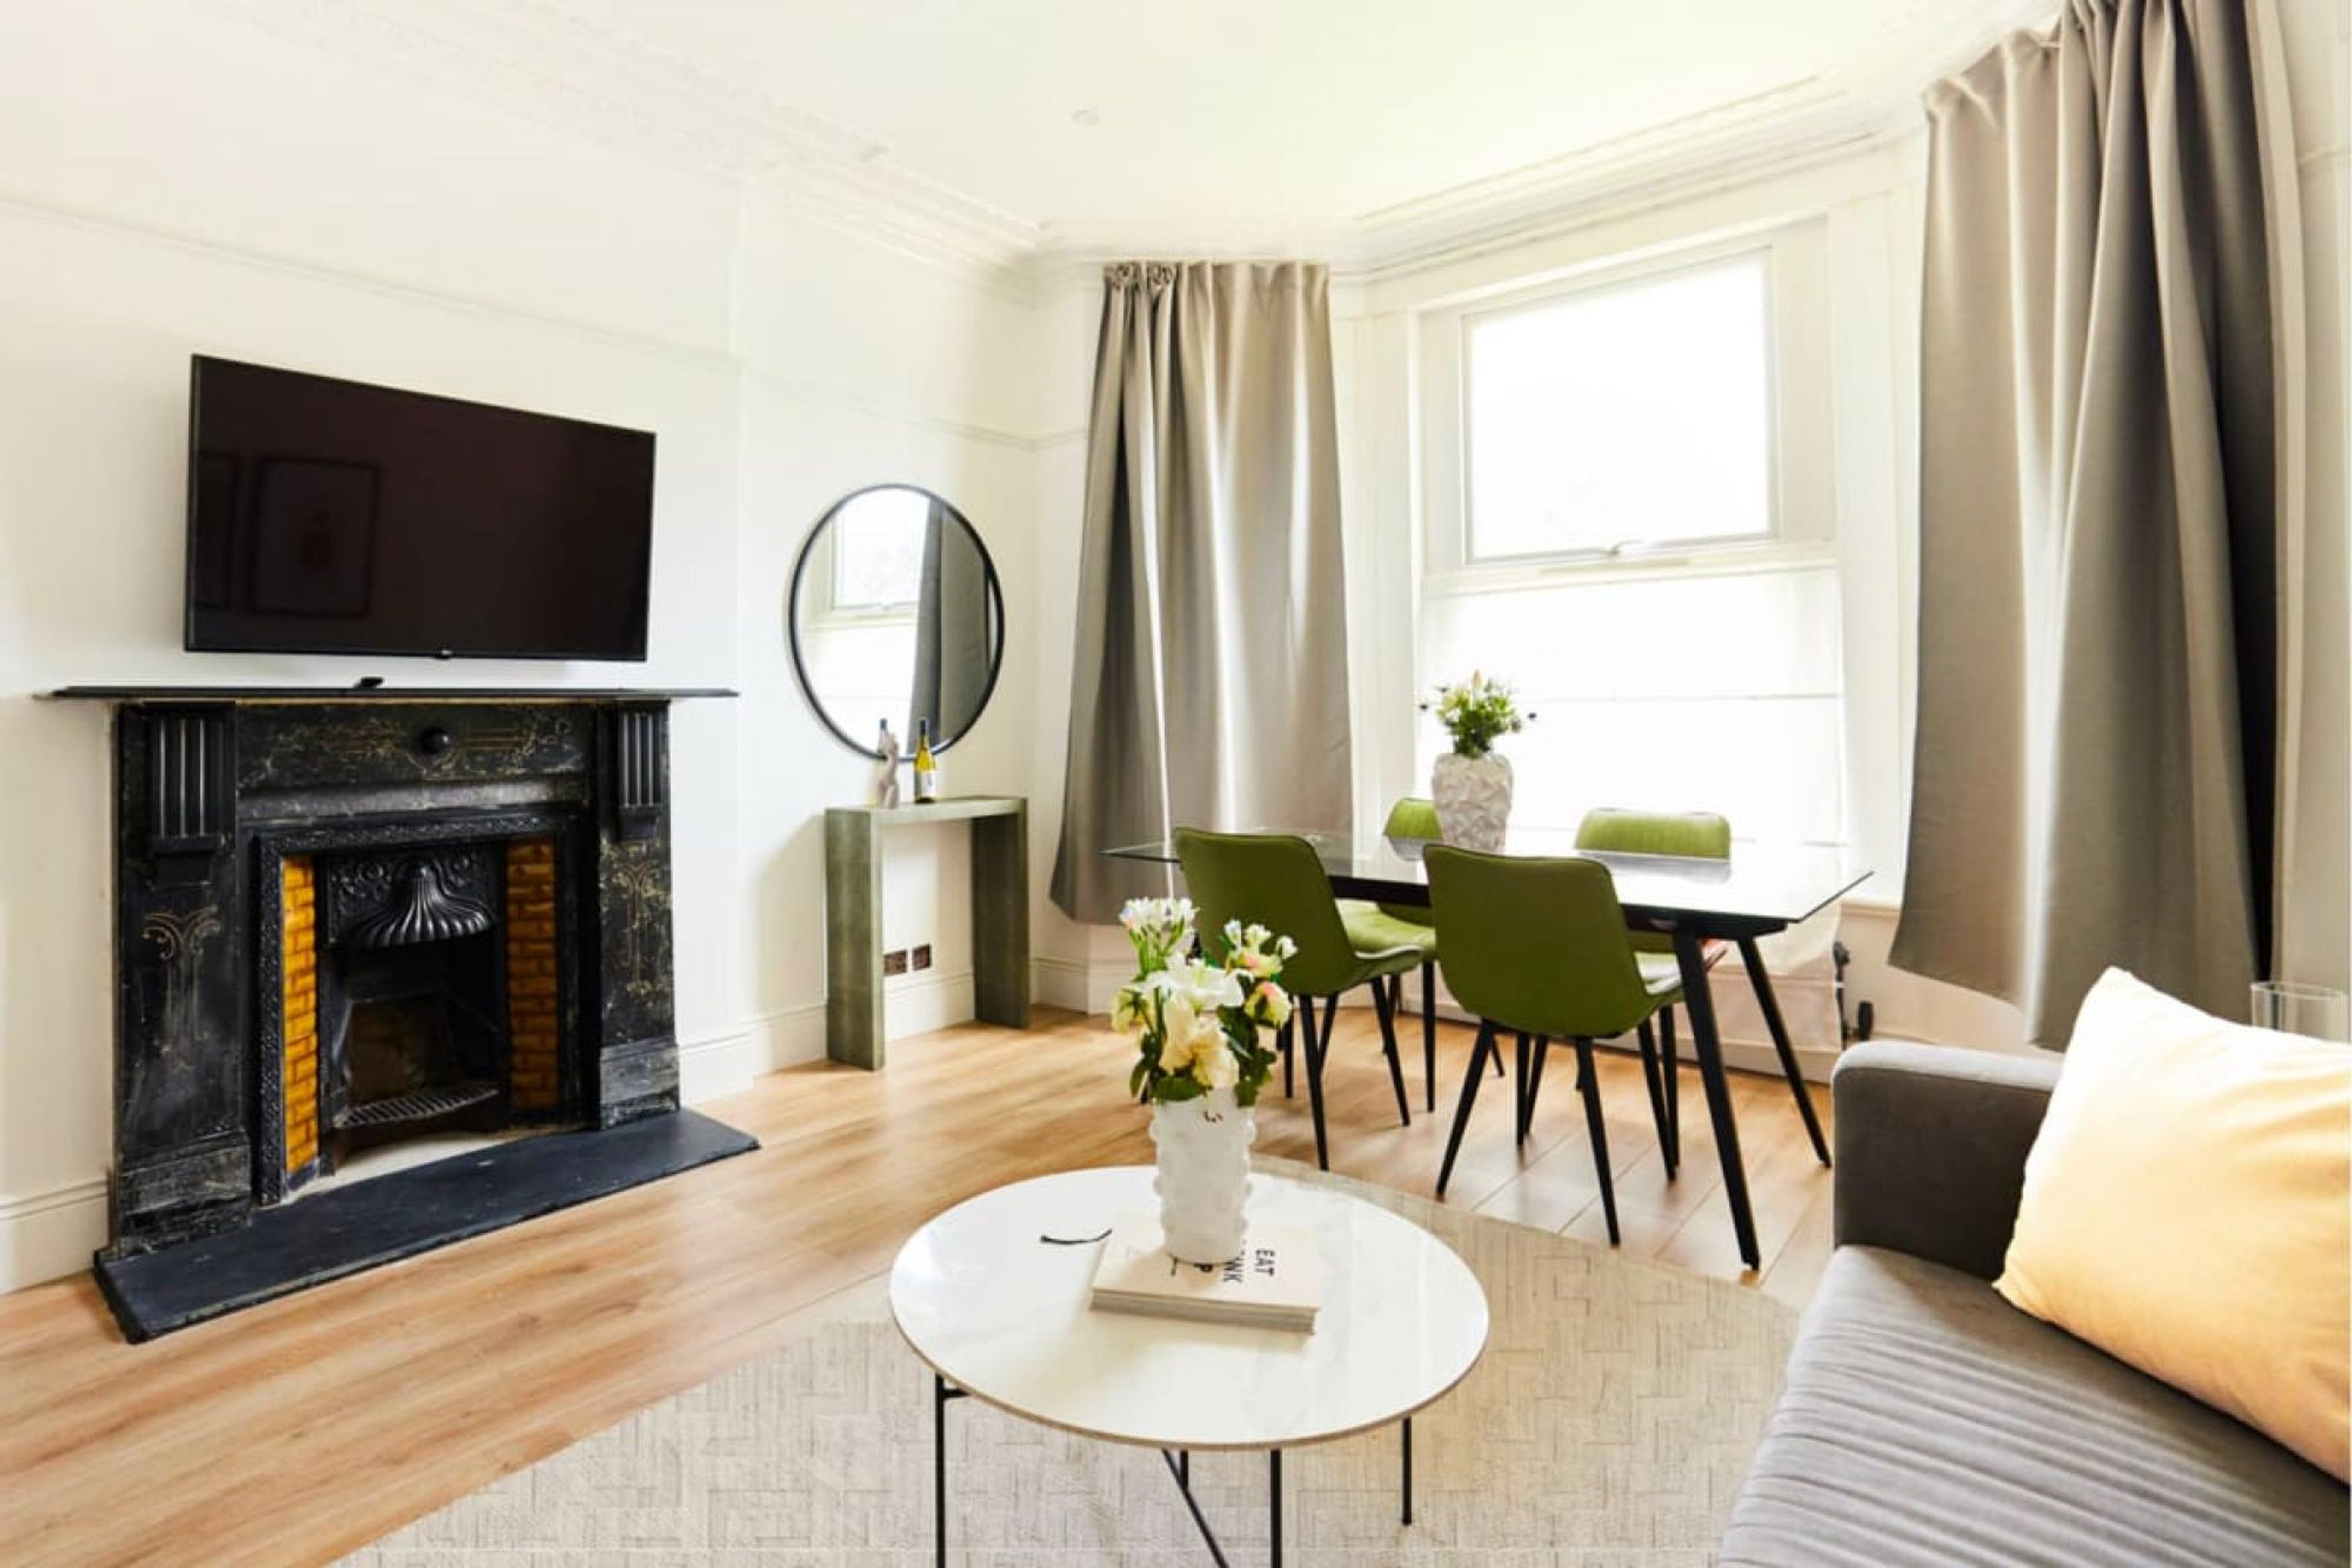 Property Image 1 - The Streatham Escape - Fascinating 2BDR Flat